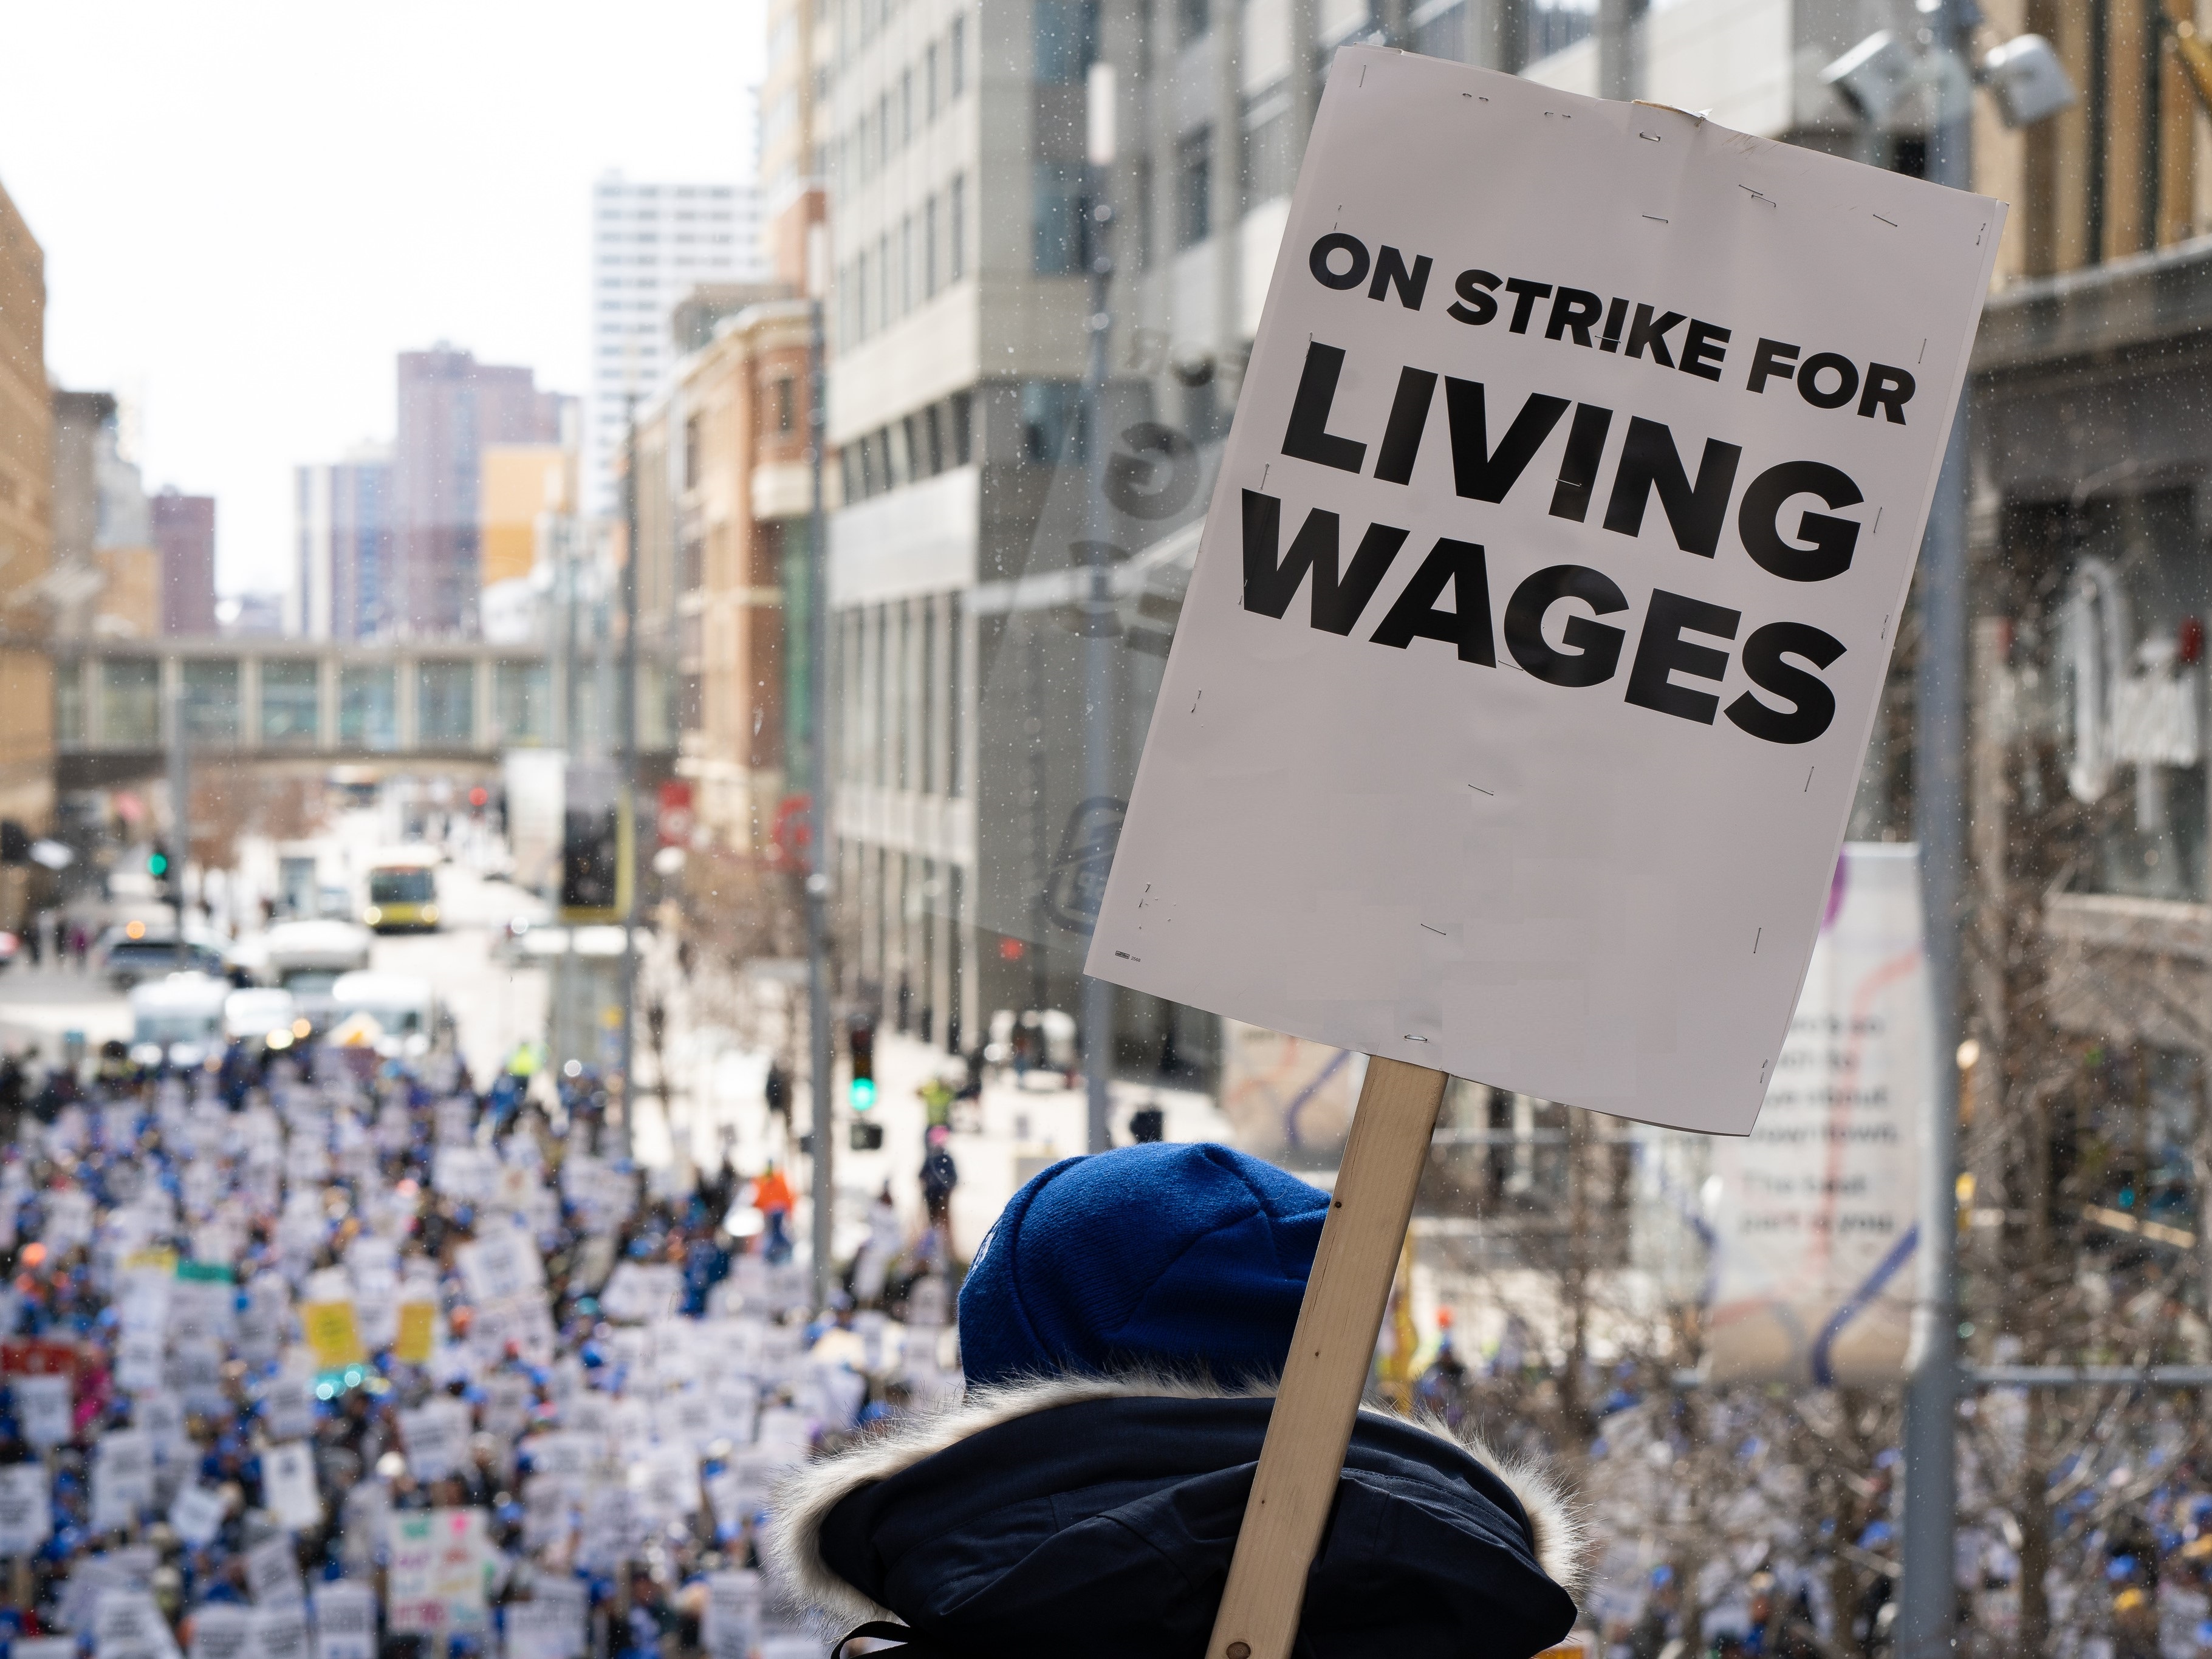 Workers march down a city street holding signs that read “ON STRIKE FOR LIVING WAGES.” 